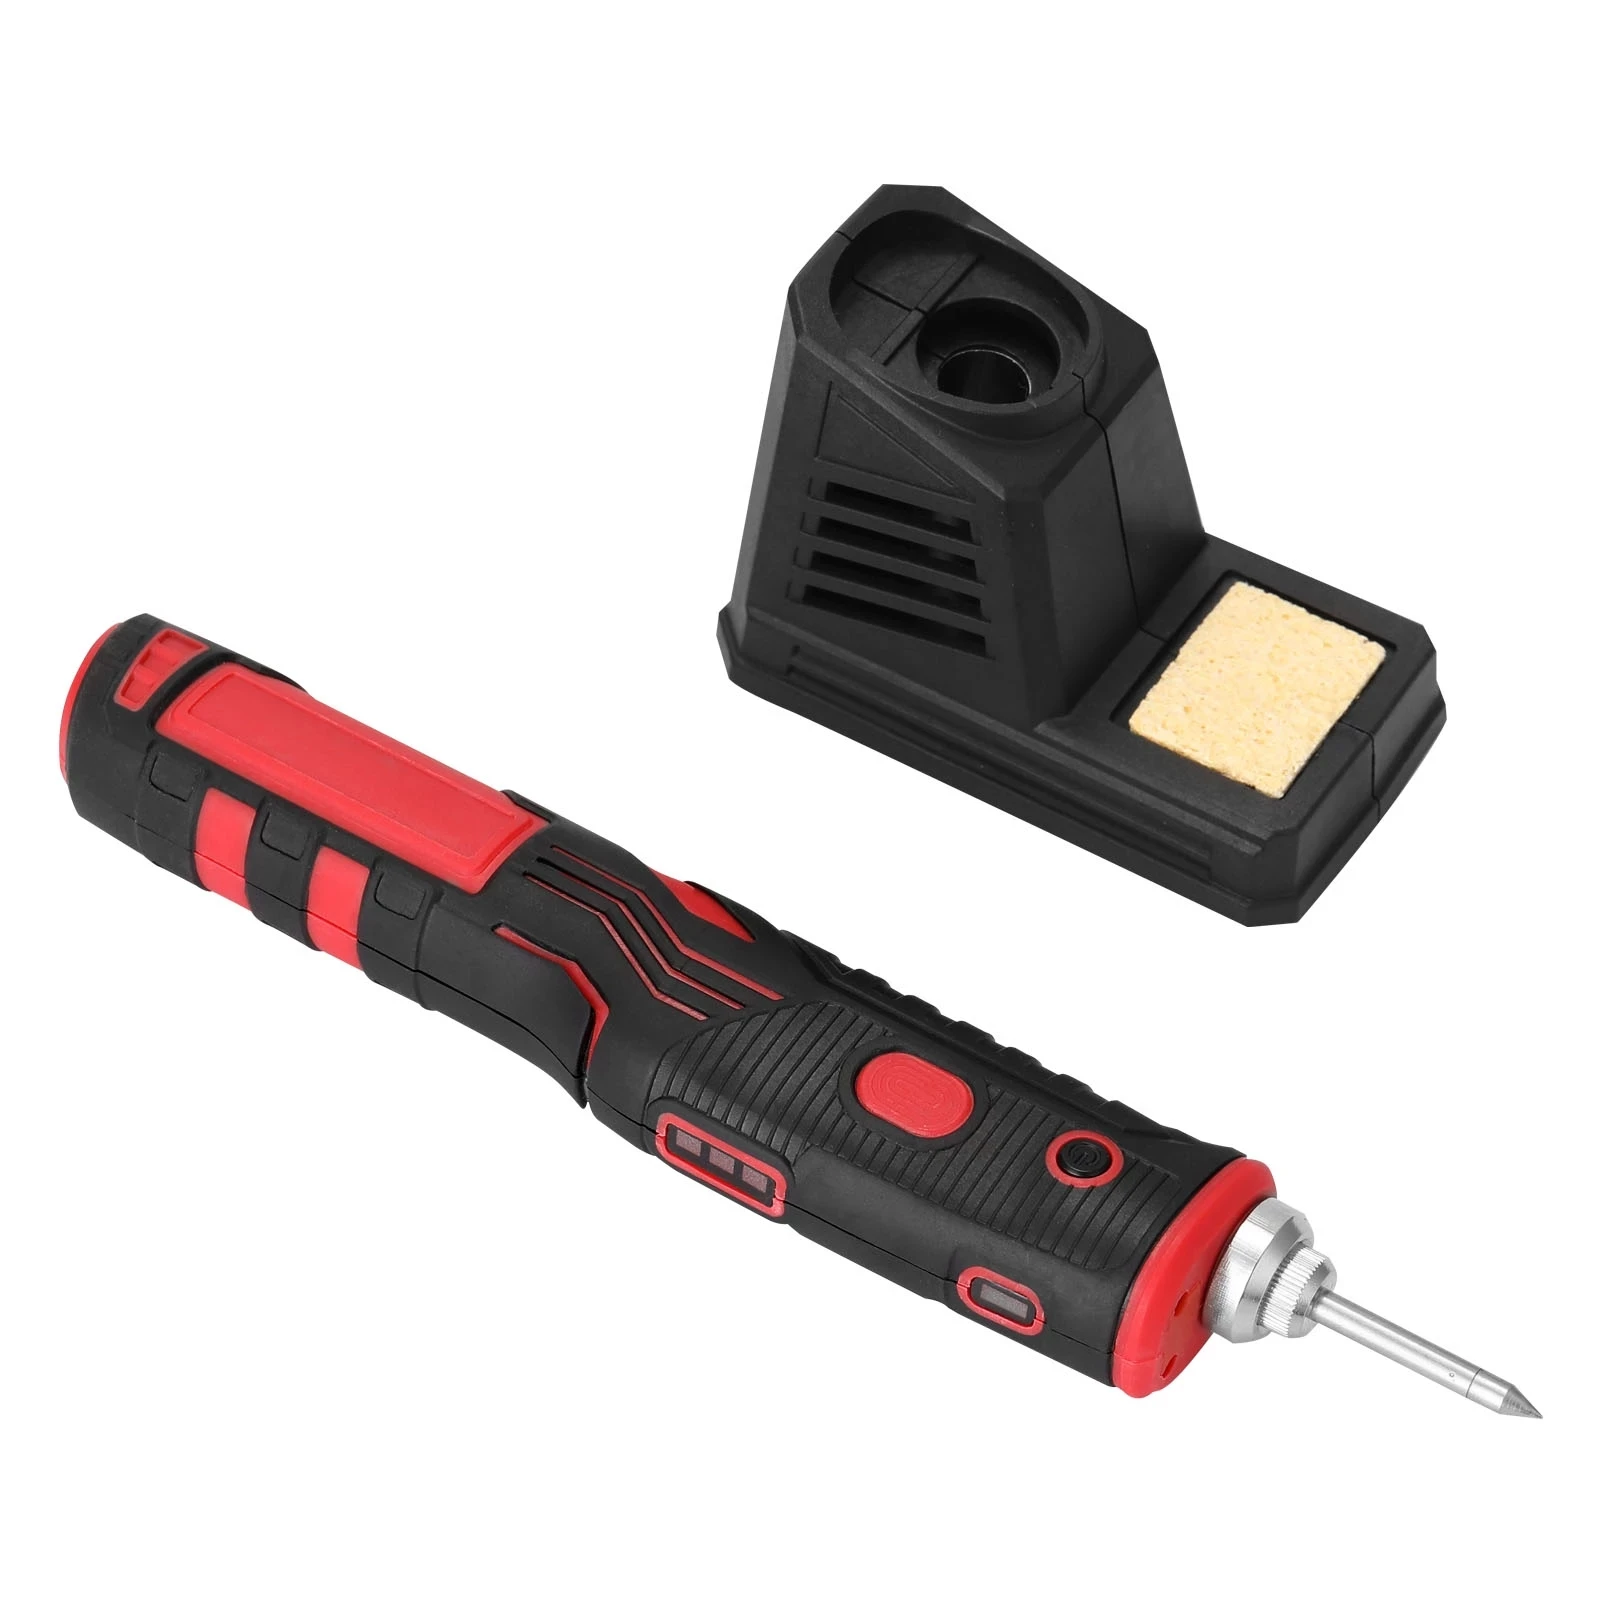 480℃ 8W Wireless Soldering Iron Portable USB Rechargeable Cordless Electric Solde Iron Kit with Bright LED Light Household Tool 480℃ 8w wireless soldering iron usb rechargeable electric soldering iron kit with bright led light portable household appliances